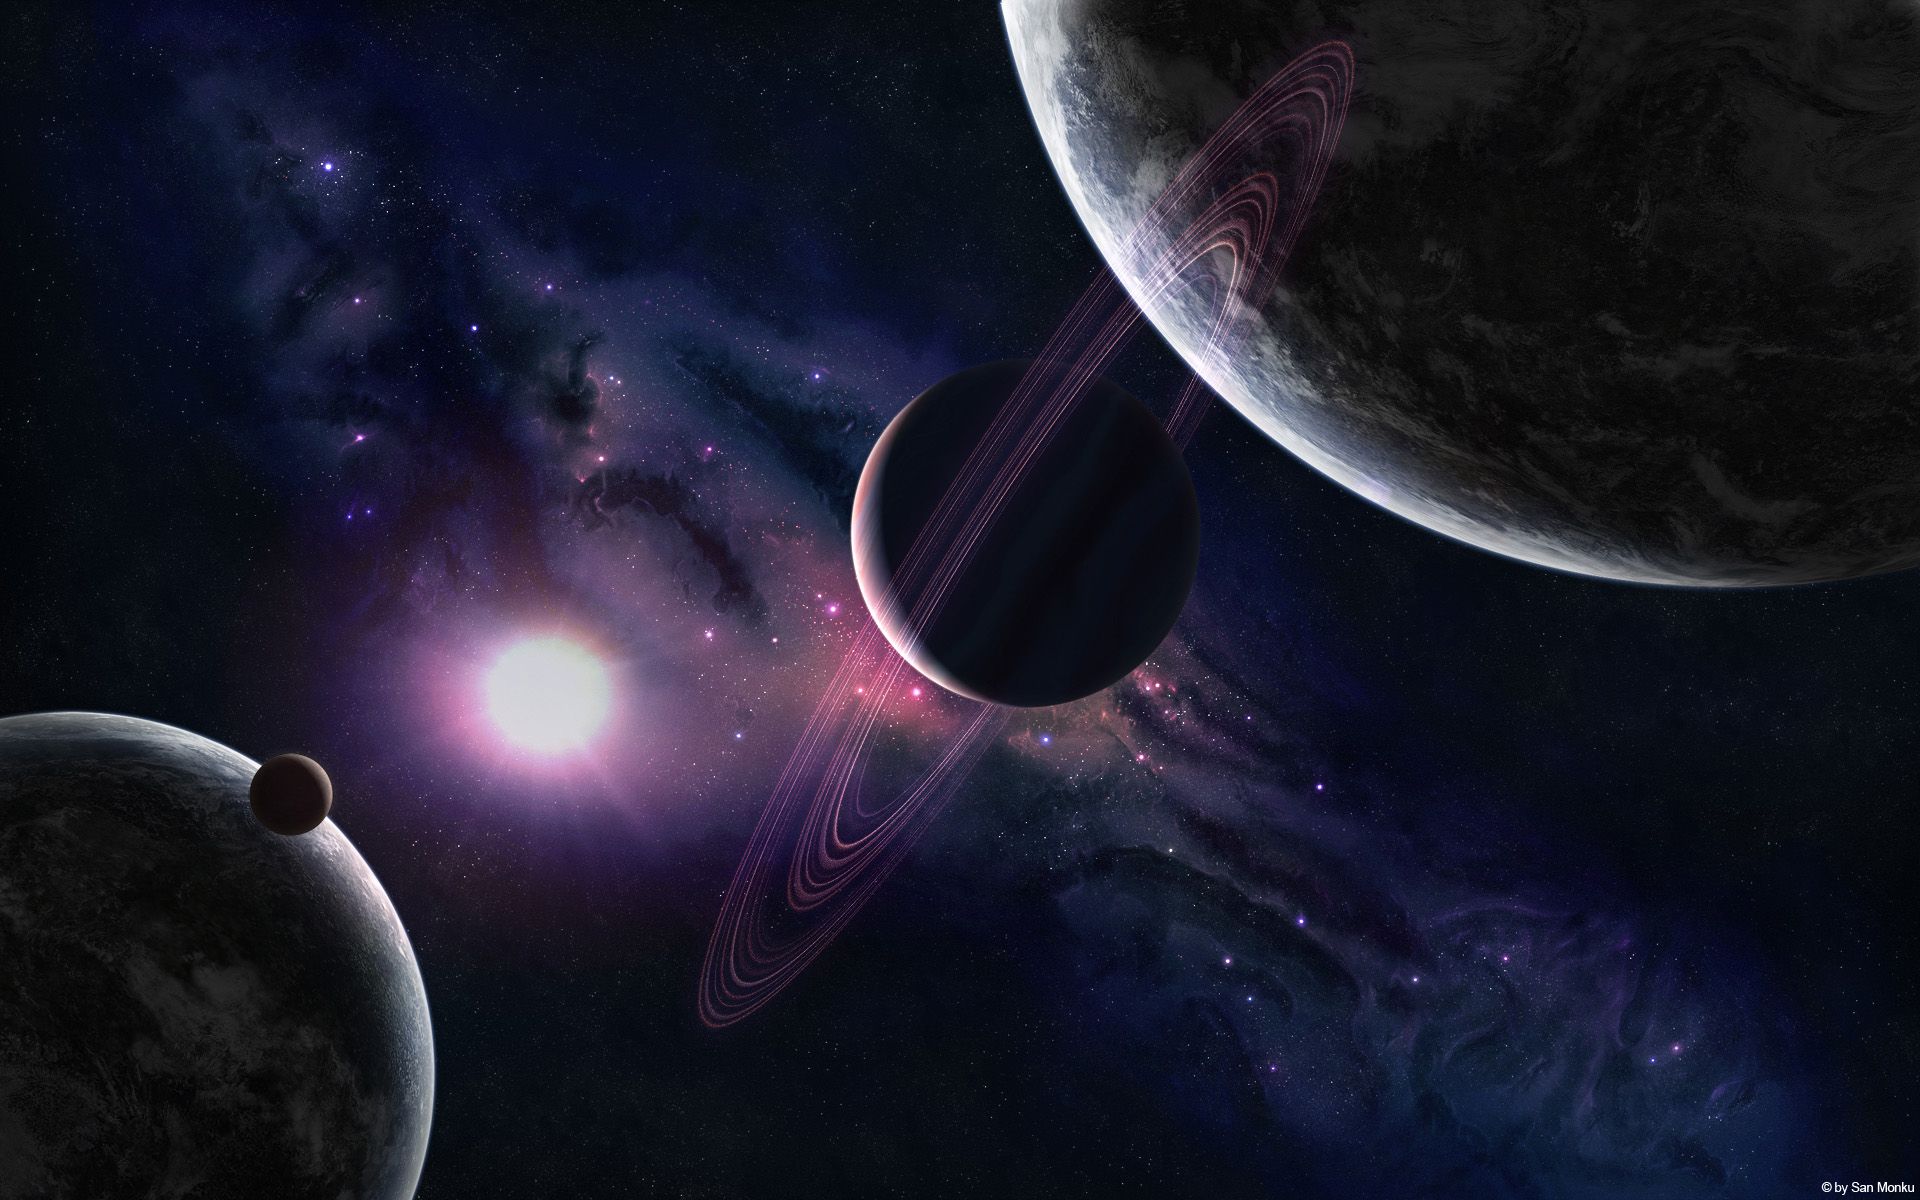 A space scene with planets and stars - Planet, galaxy, space